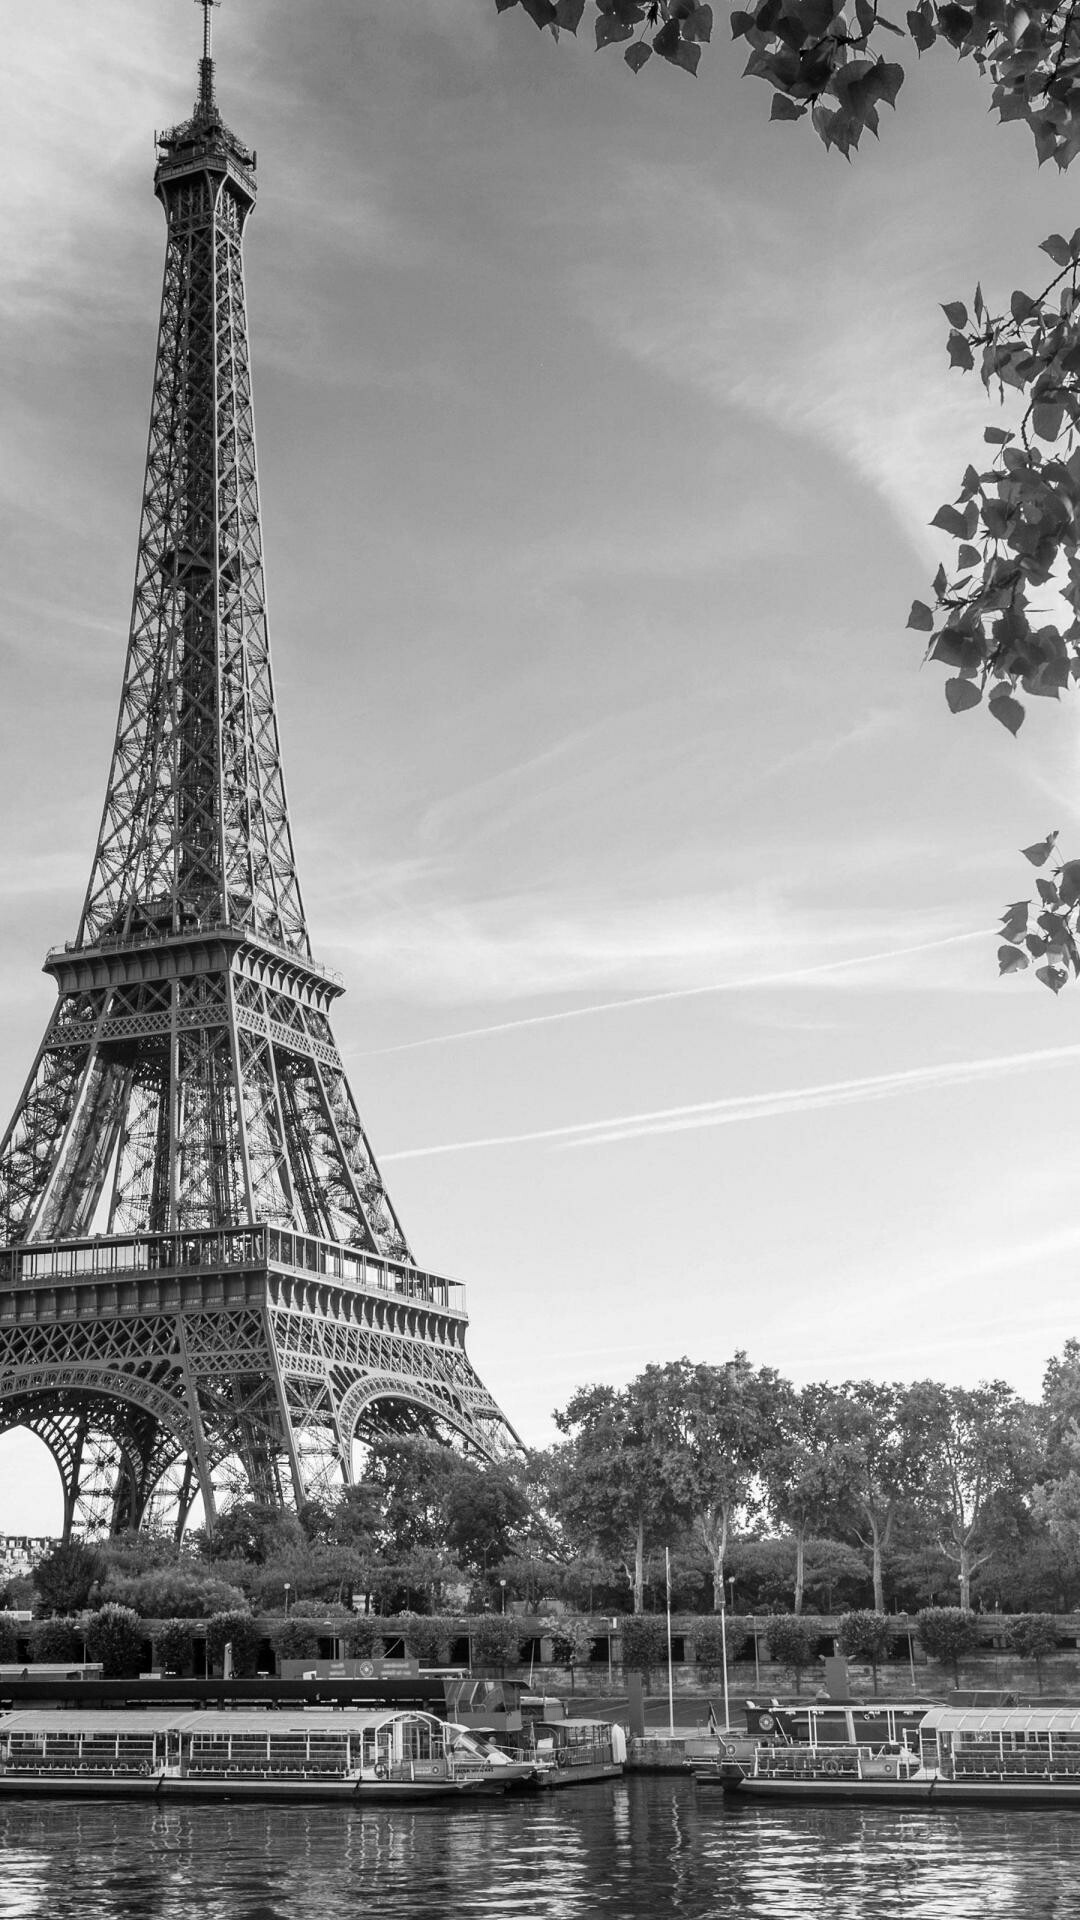 Eiffel Tower: French landmark, Constructed from 1887 to 1889 as the centerpiece of the 1889 World's Fair, Monochrome. 1080x1920 Full HD Wallpaper.